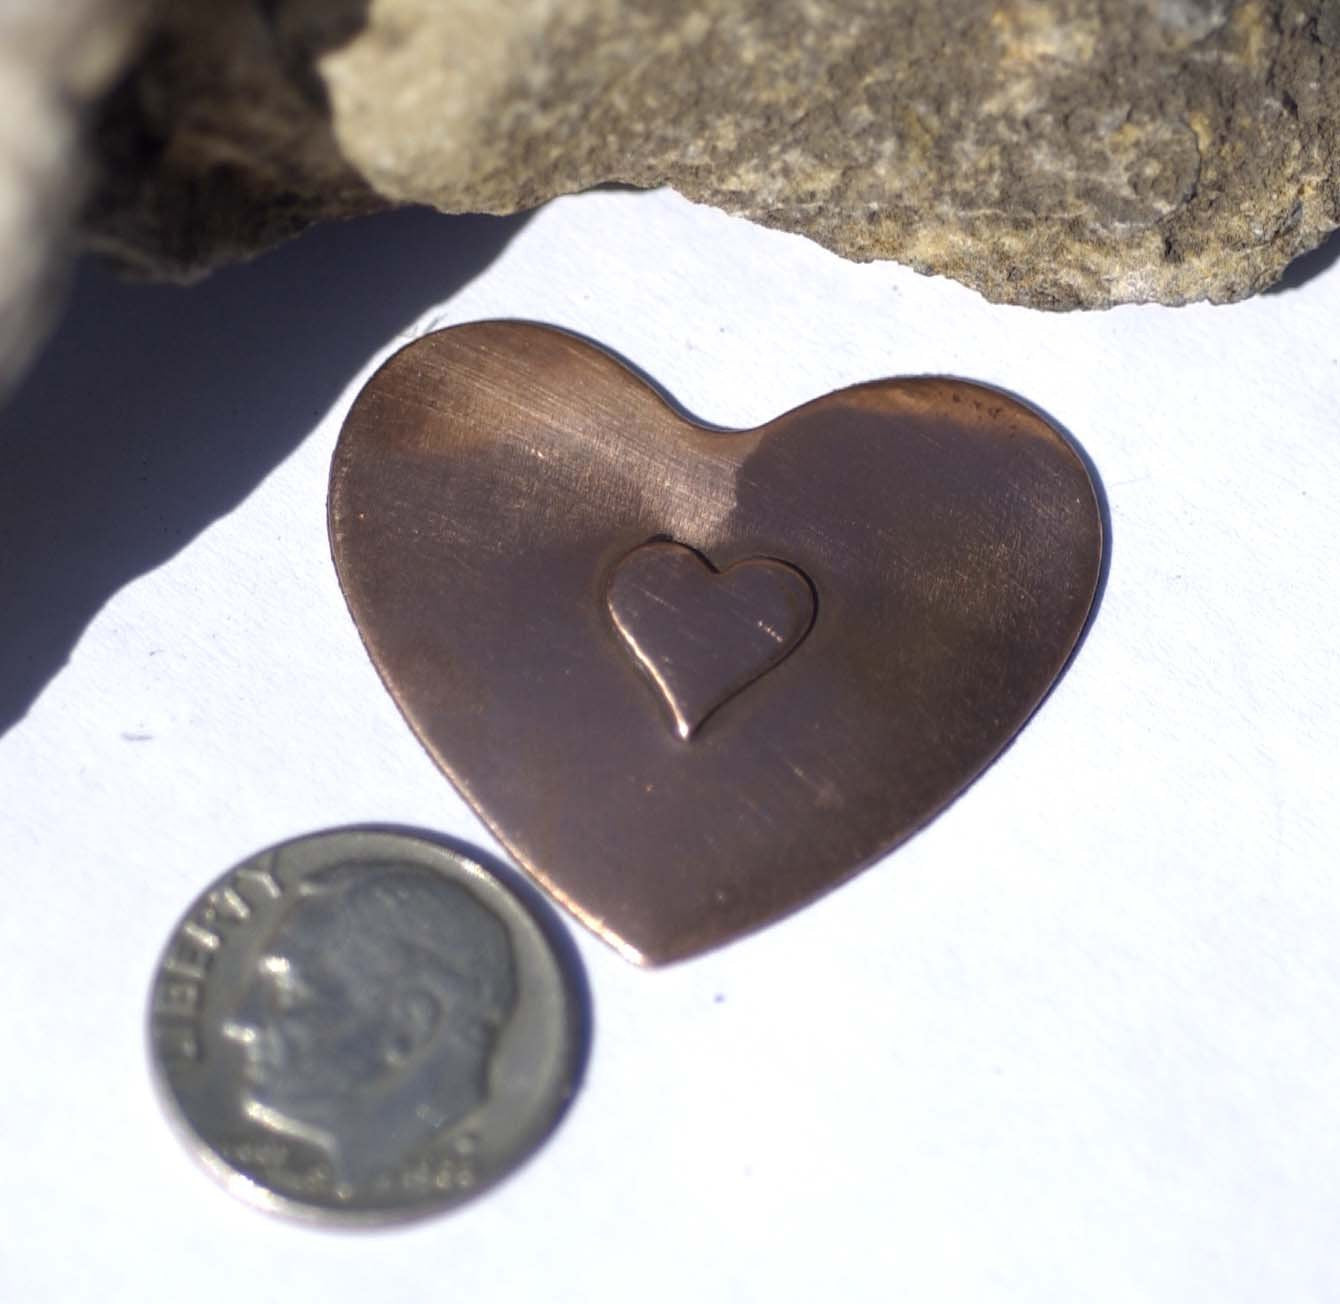 Heart 8.5mm Embossed on Heart Blank Cutout for Enameling Stamping Texturing Metalworking Jewelry Making Blanks